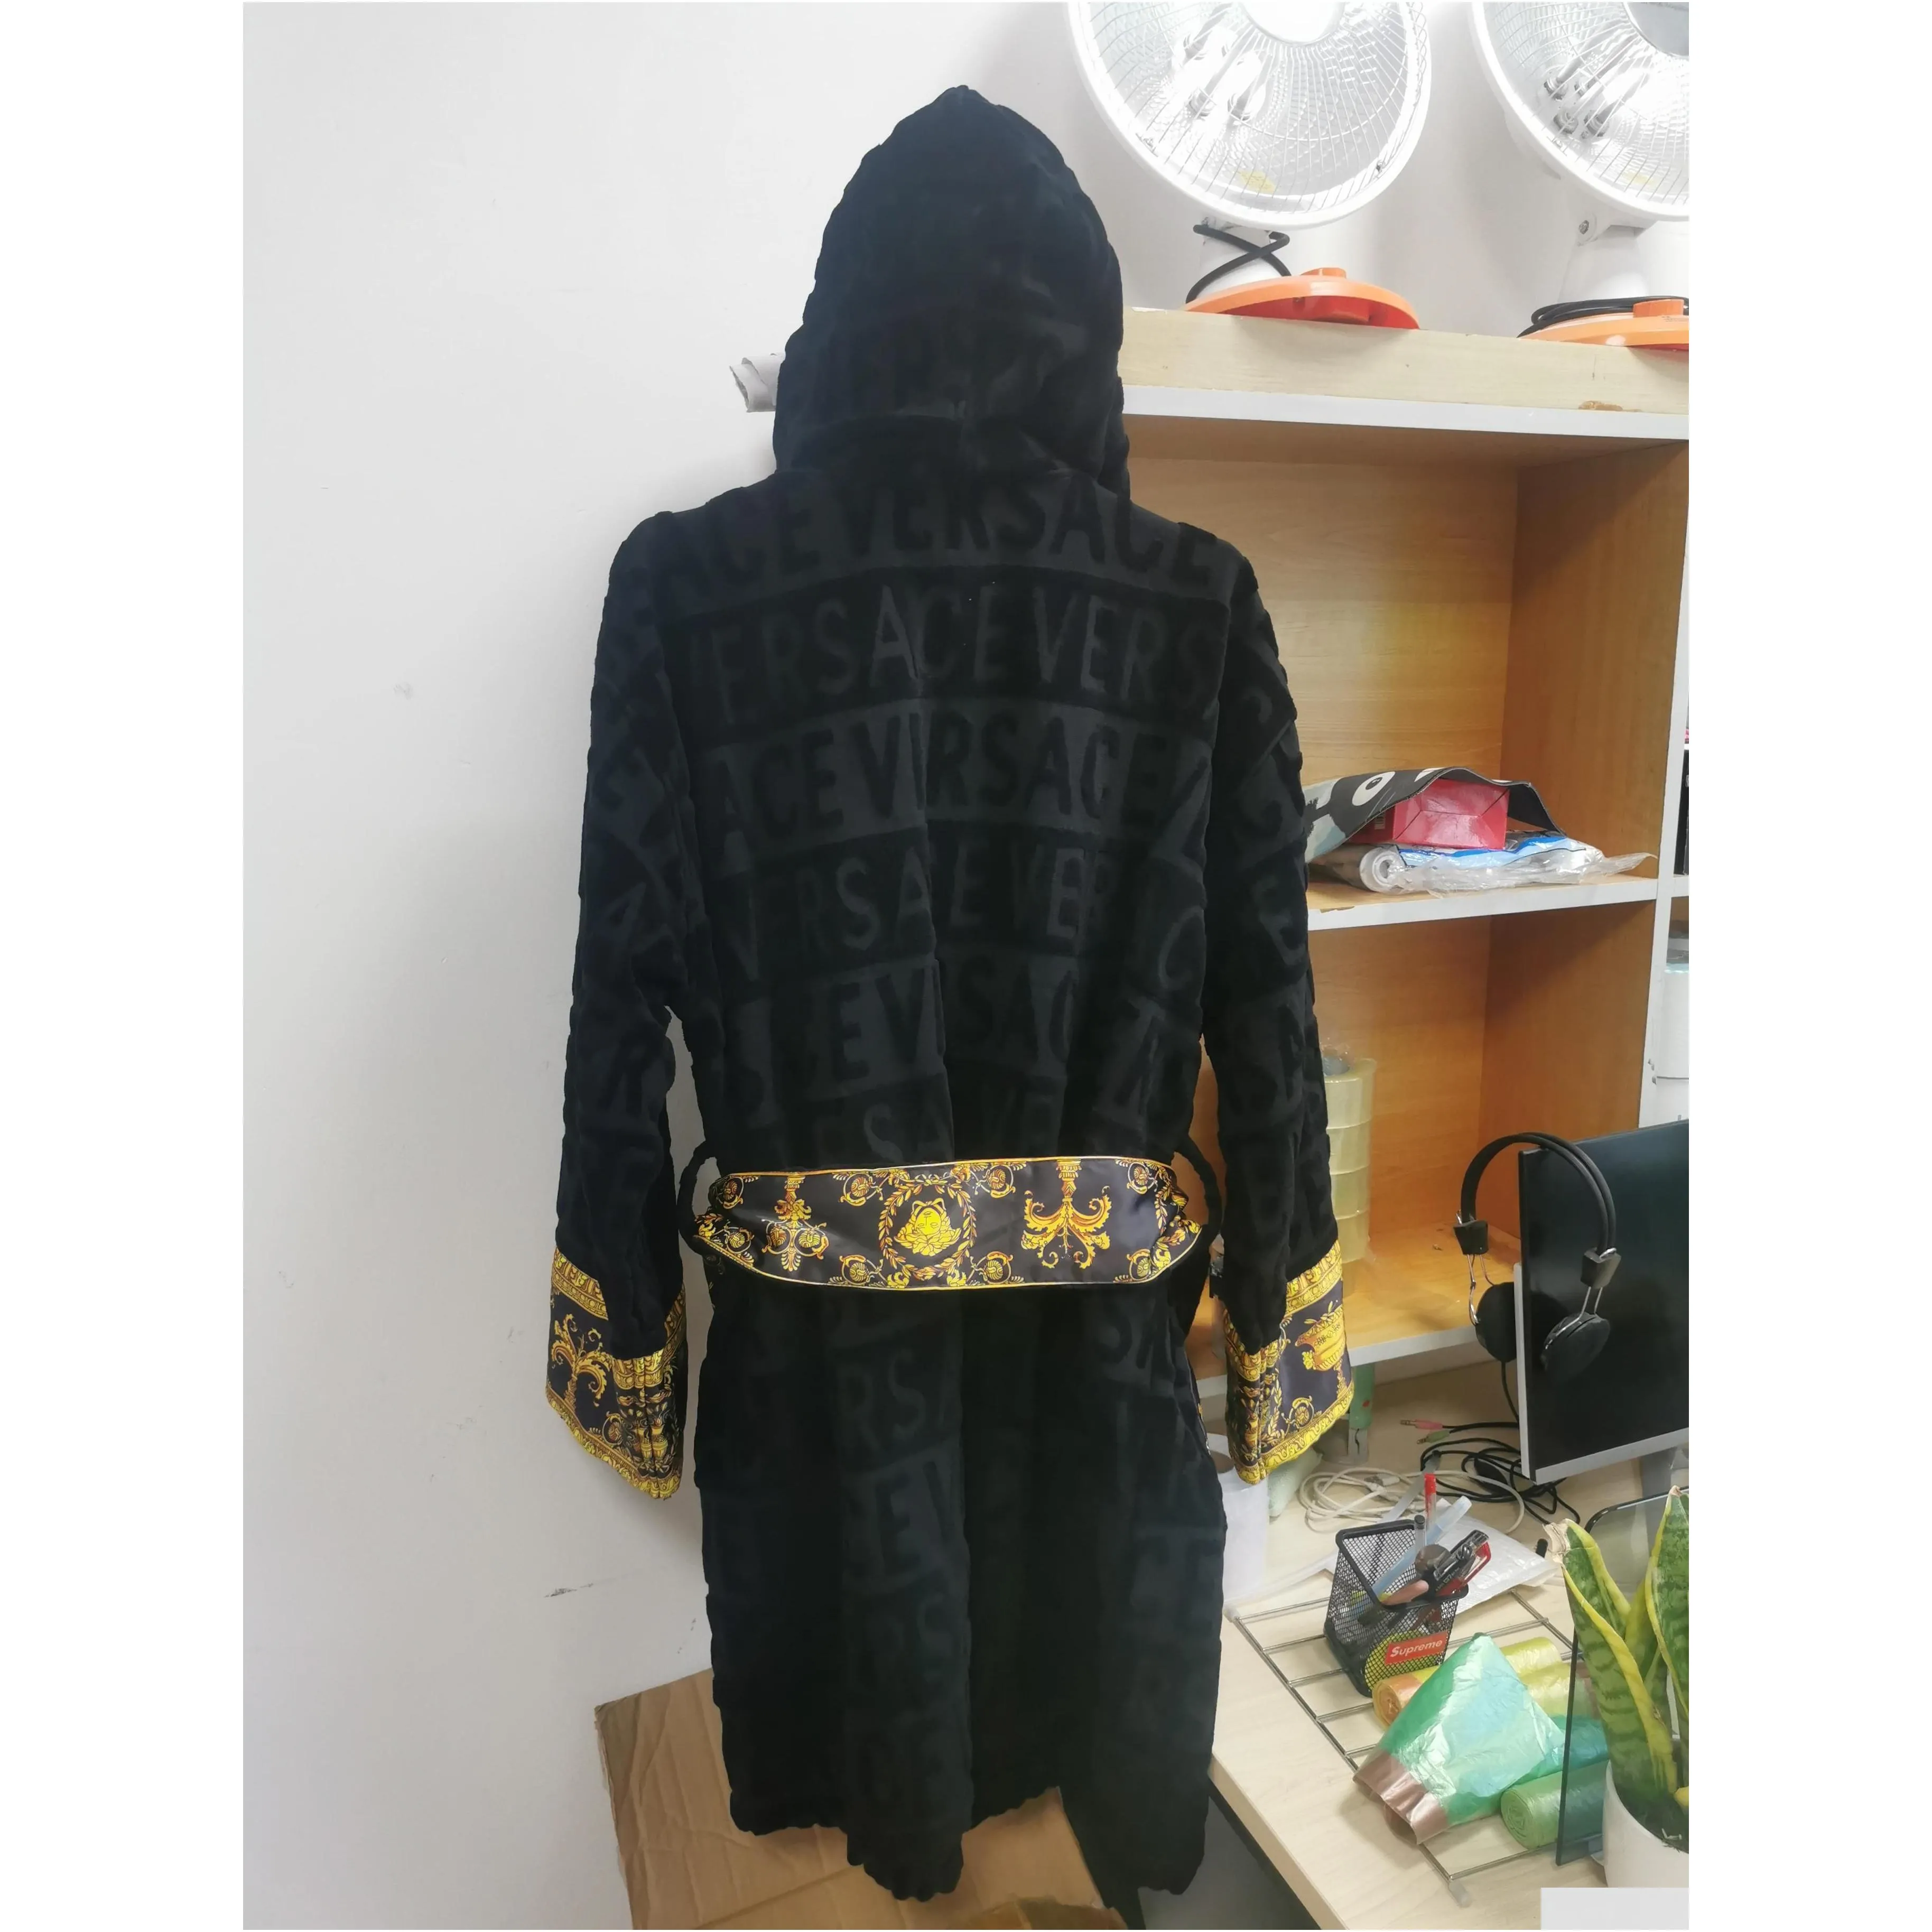 Men Women Home Bath Robe INS Letter Jacquard Sleepwear Black Soft Touch Casual Robes Hotel Nightgown